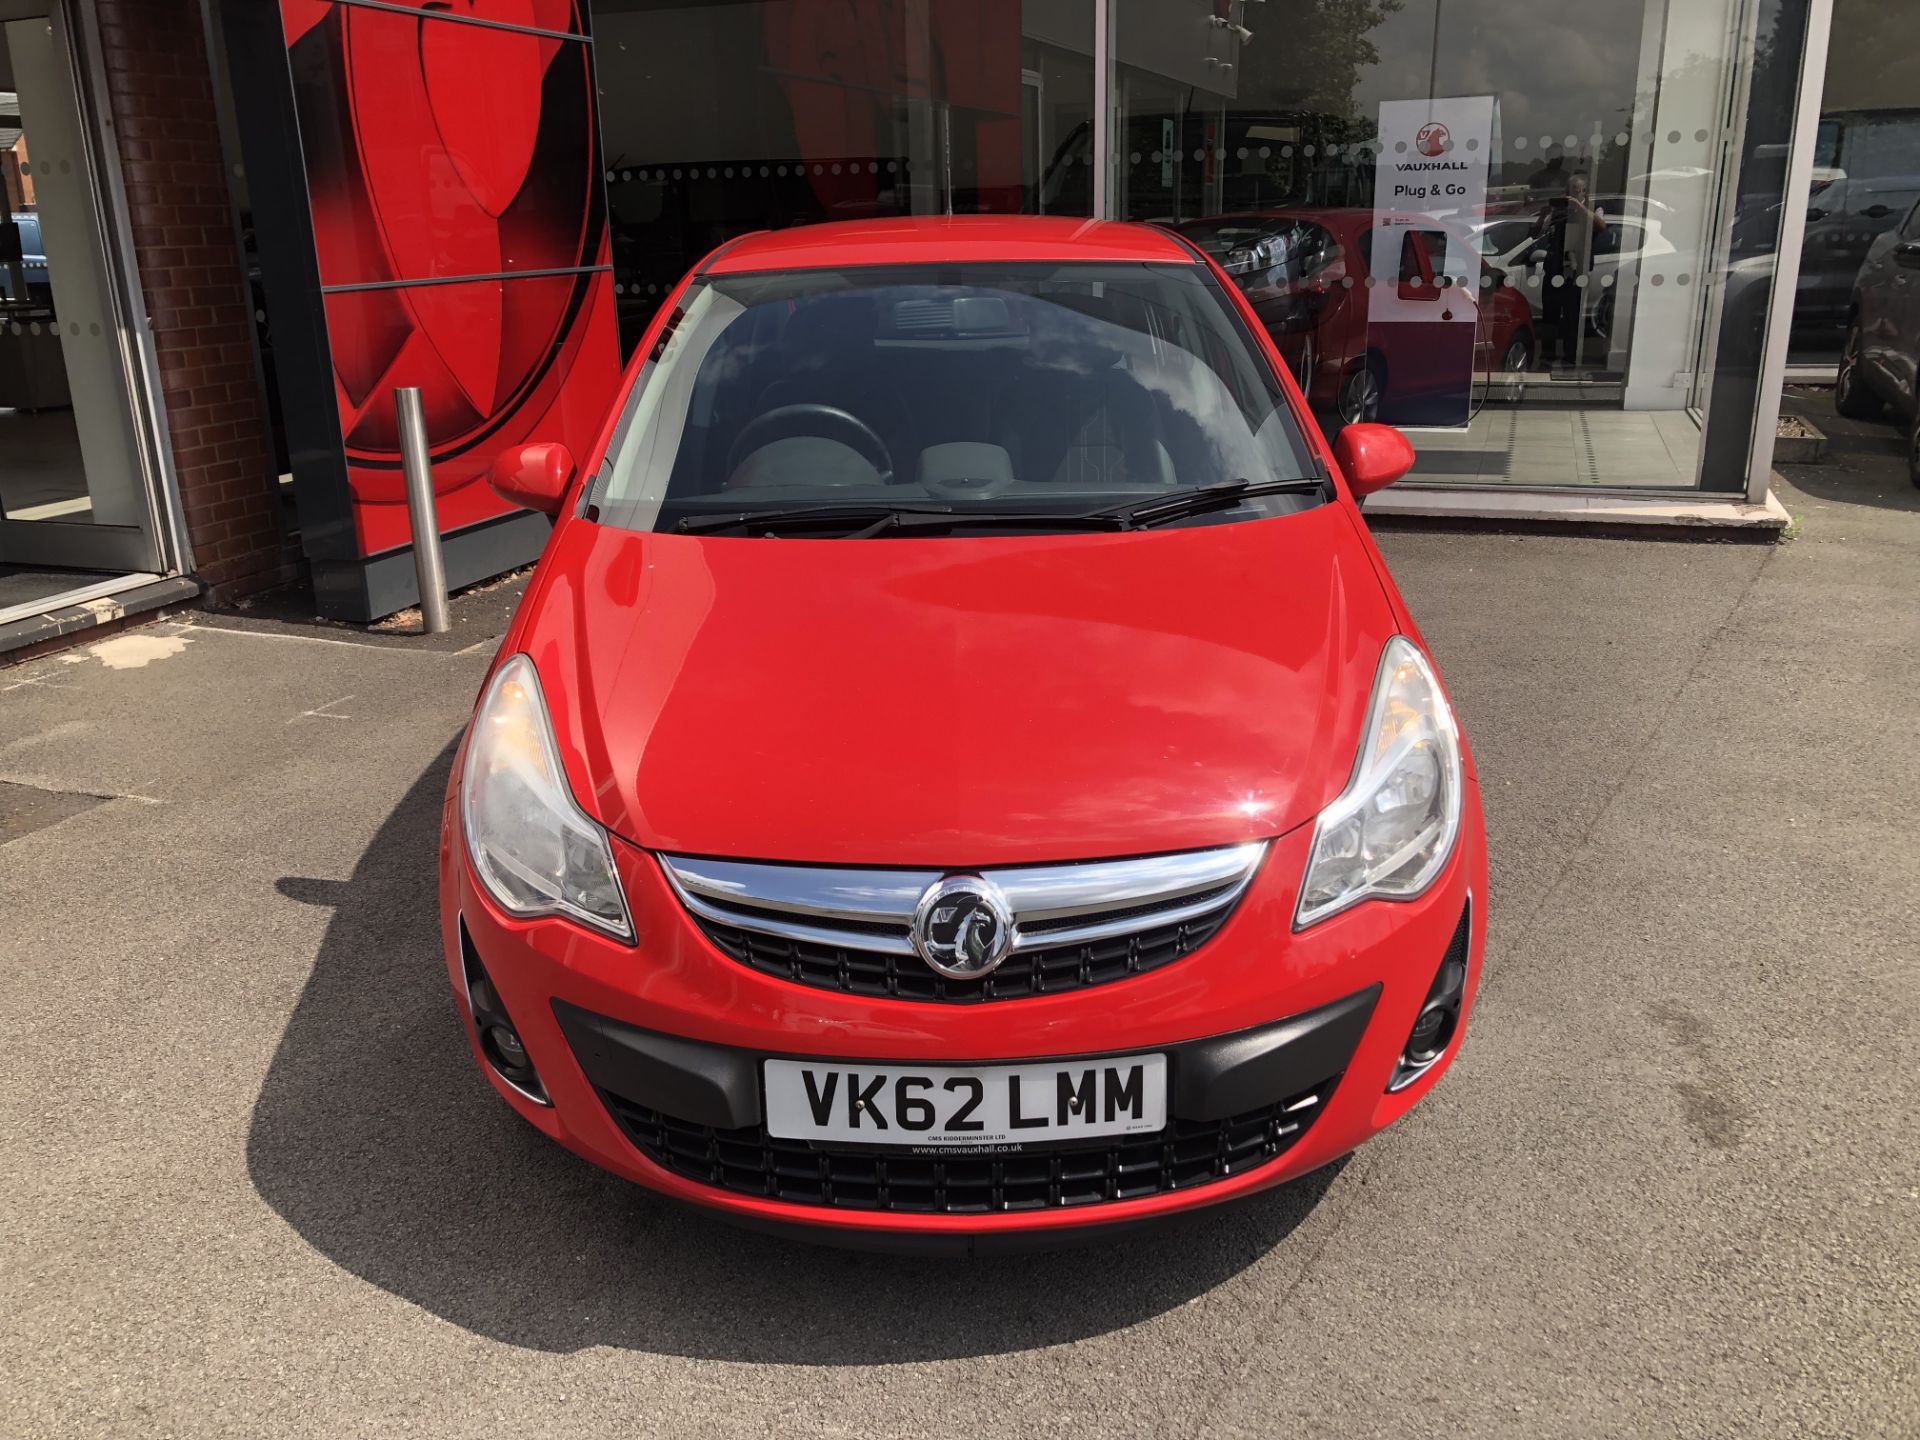 Vauxhall Corsa 1.2i (85ps) Active 5dr Air Con, Registration: VK62LMM, Date First Registered: 29/09/ - Image 4 of 7